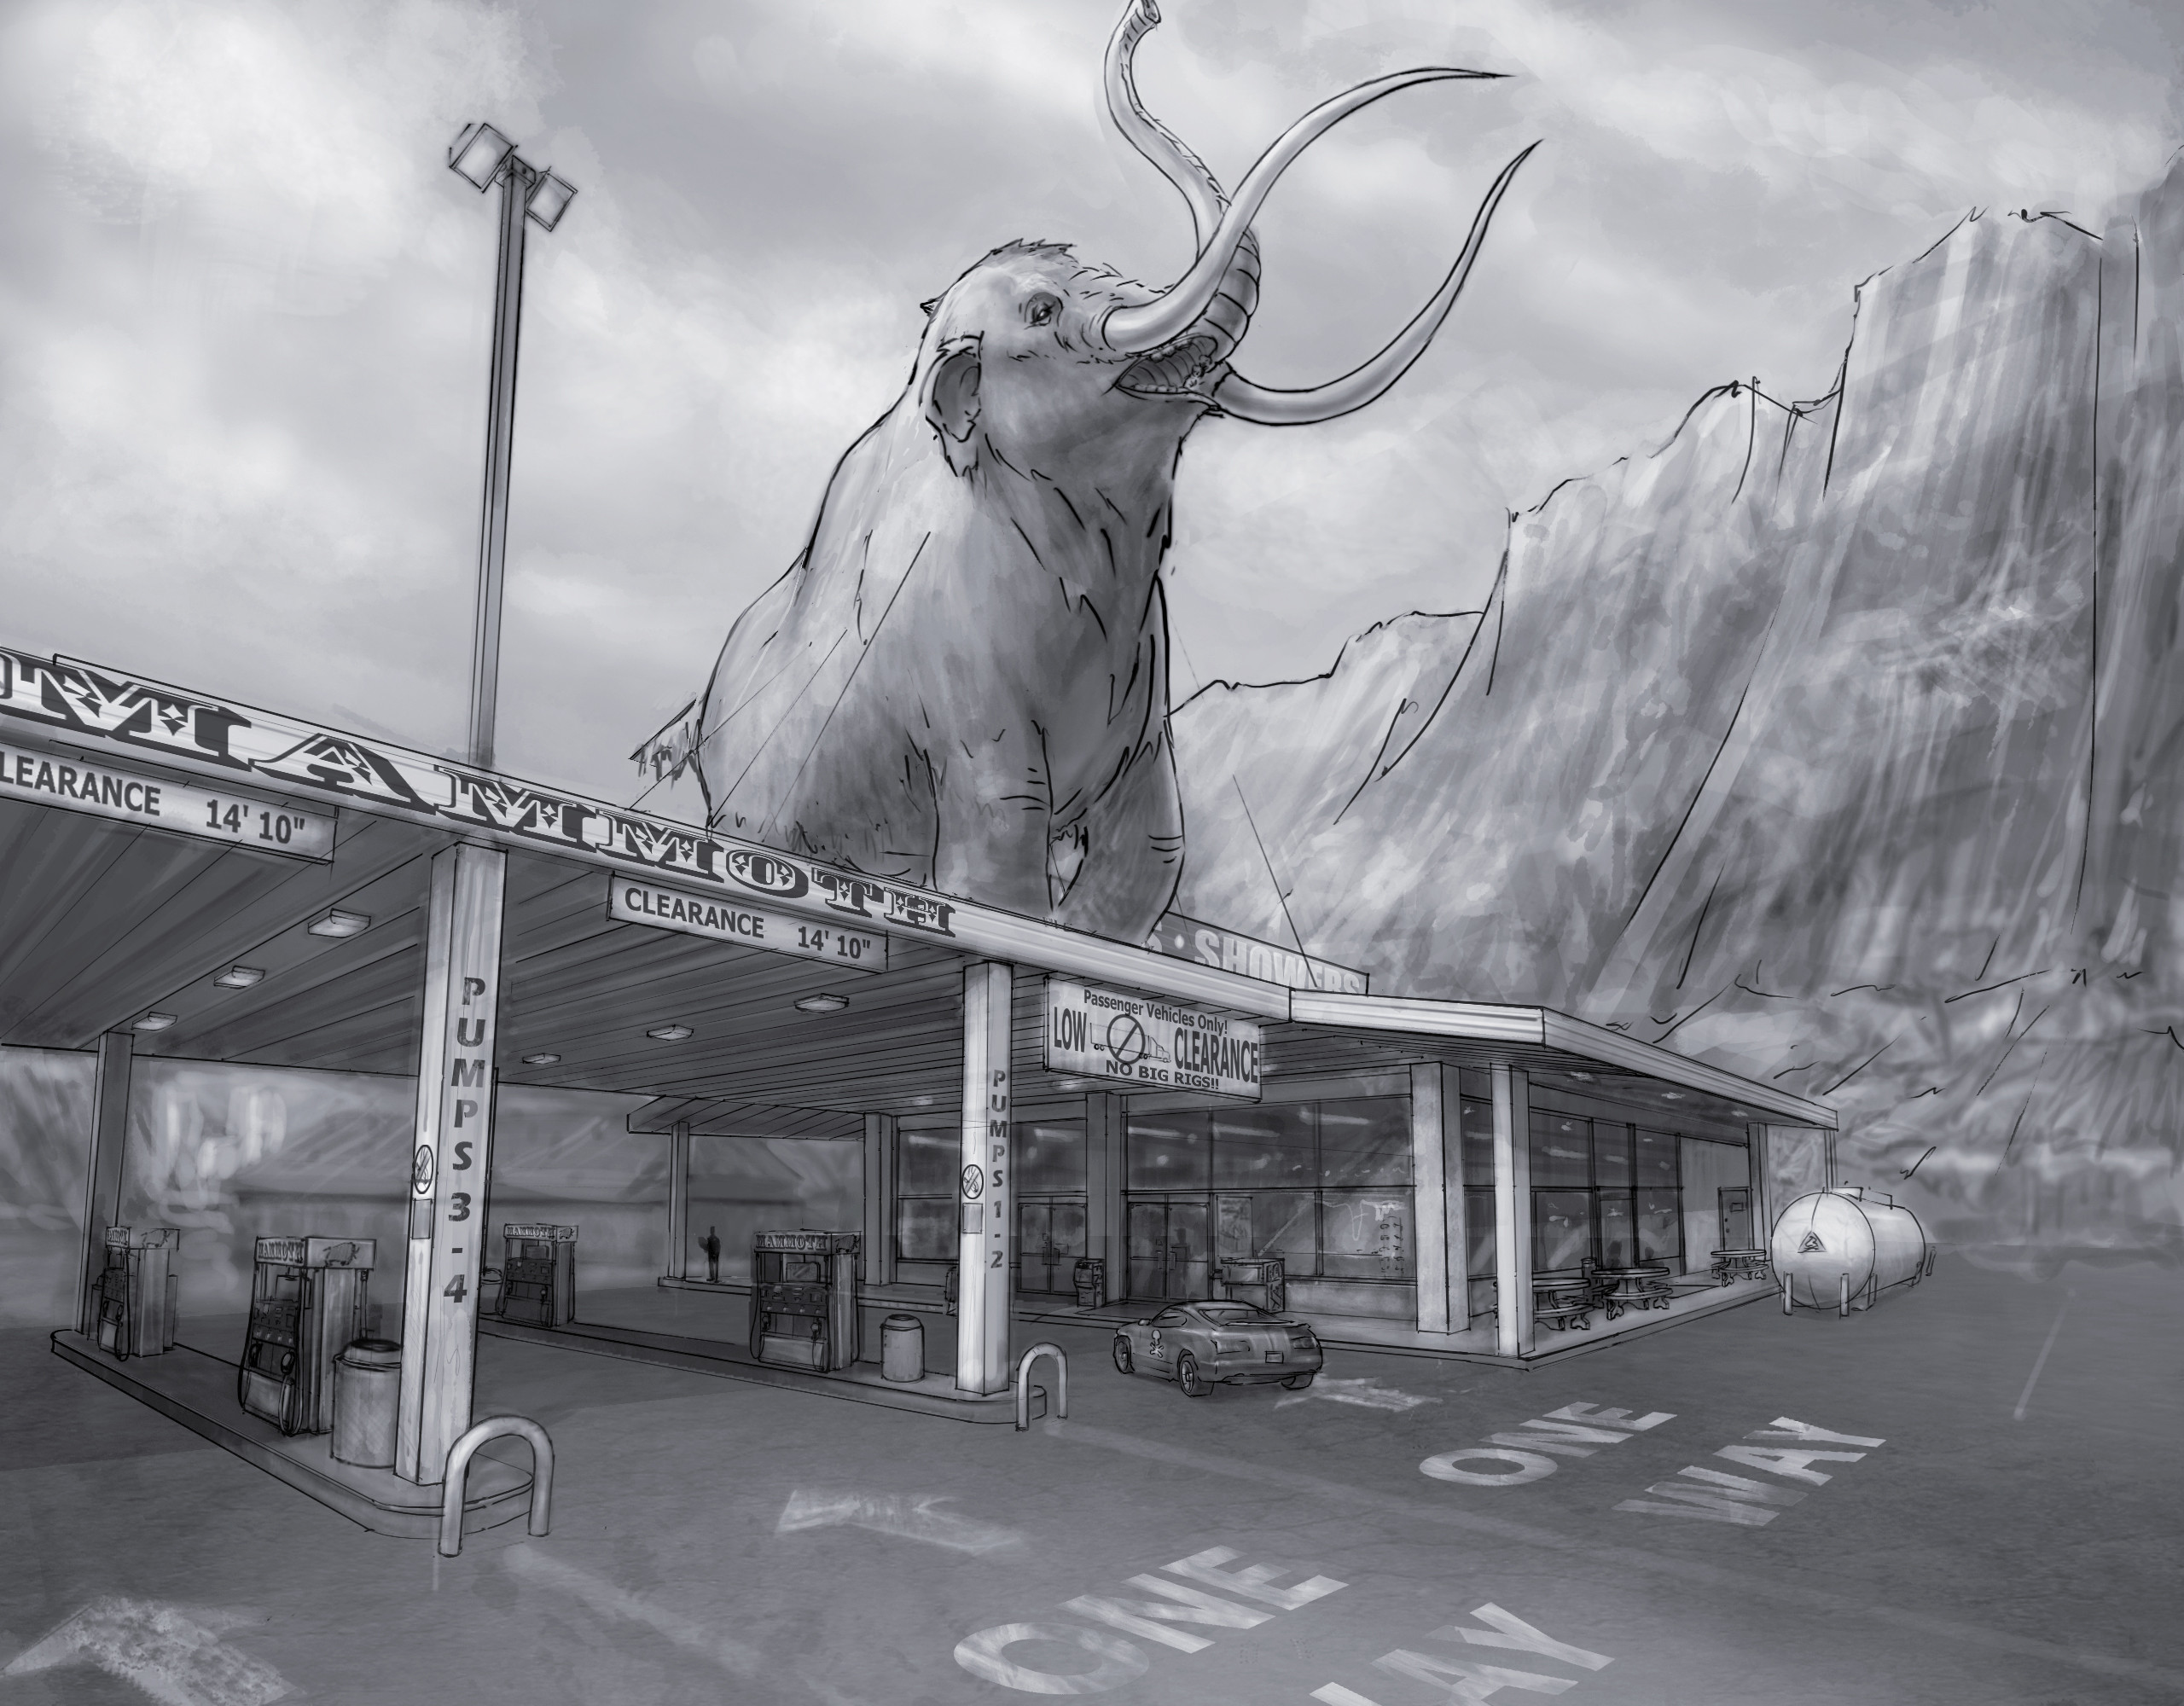 Mammoth Gas and Truck Stop
Concept Design Sketch